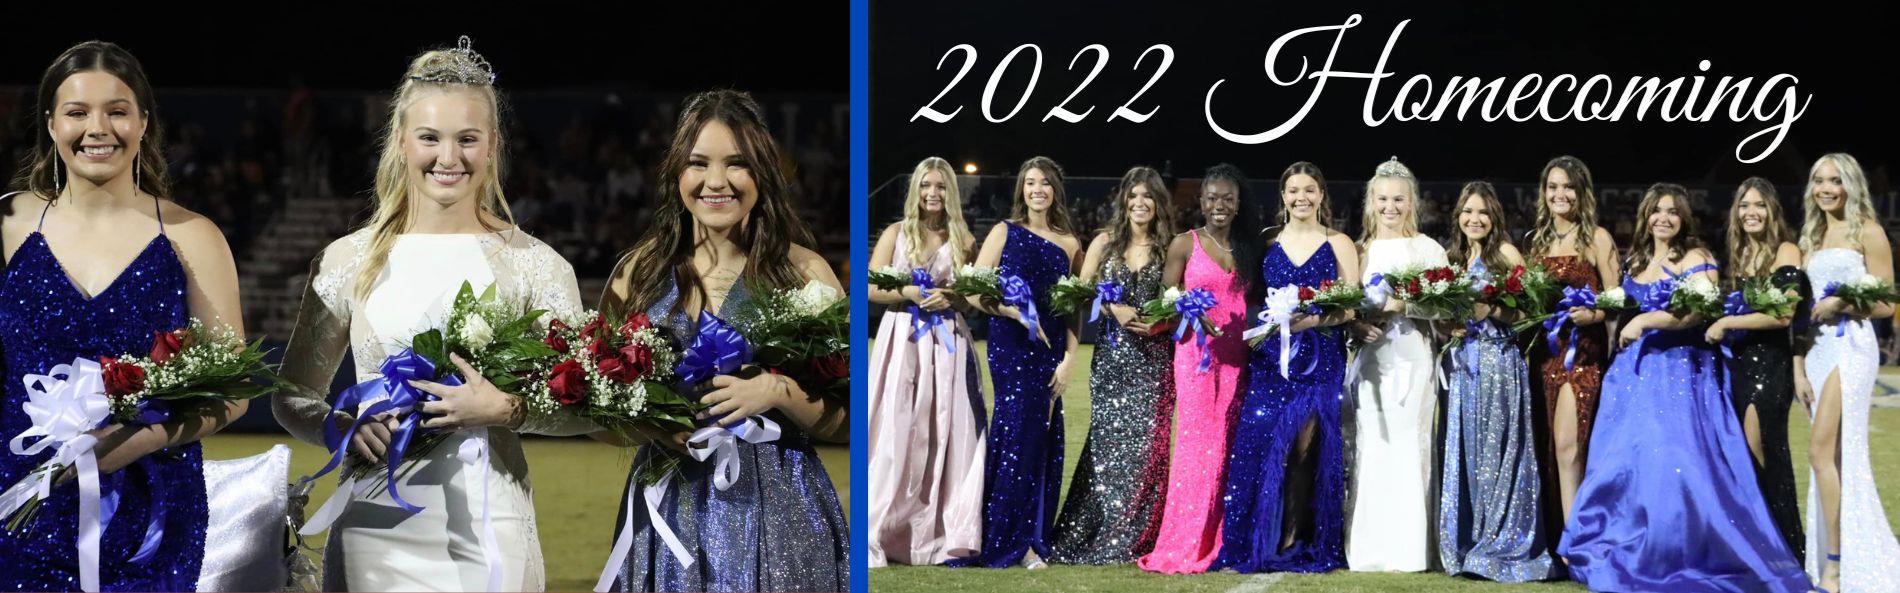 homecoming winners and court